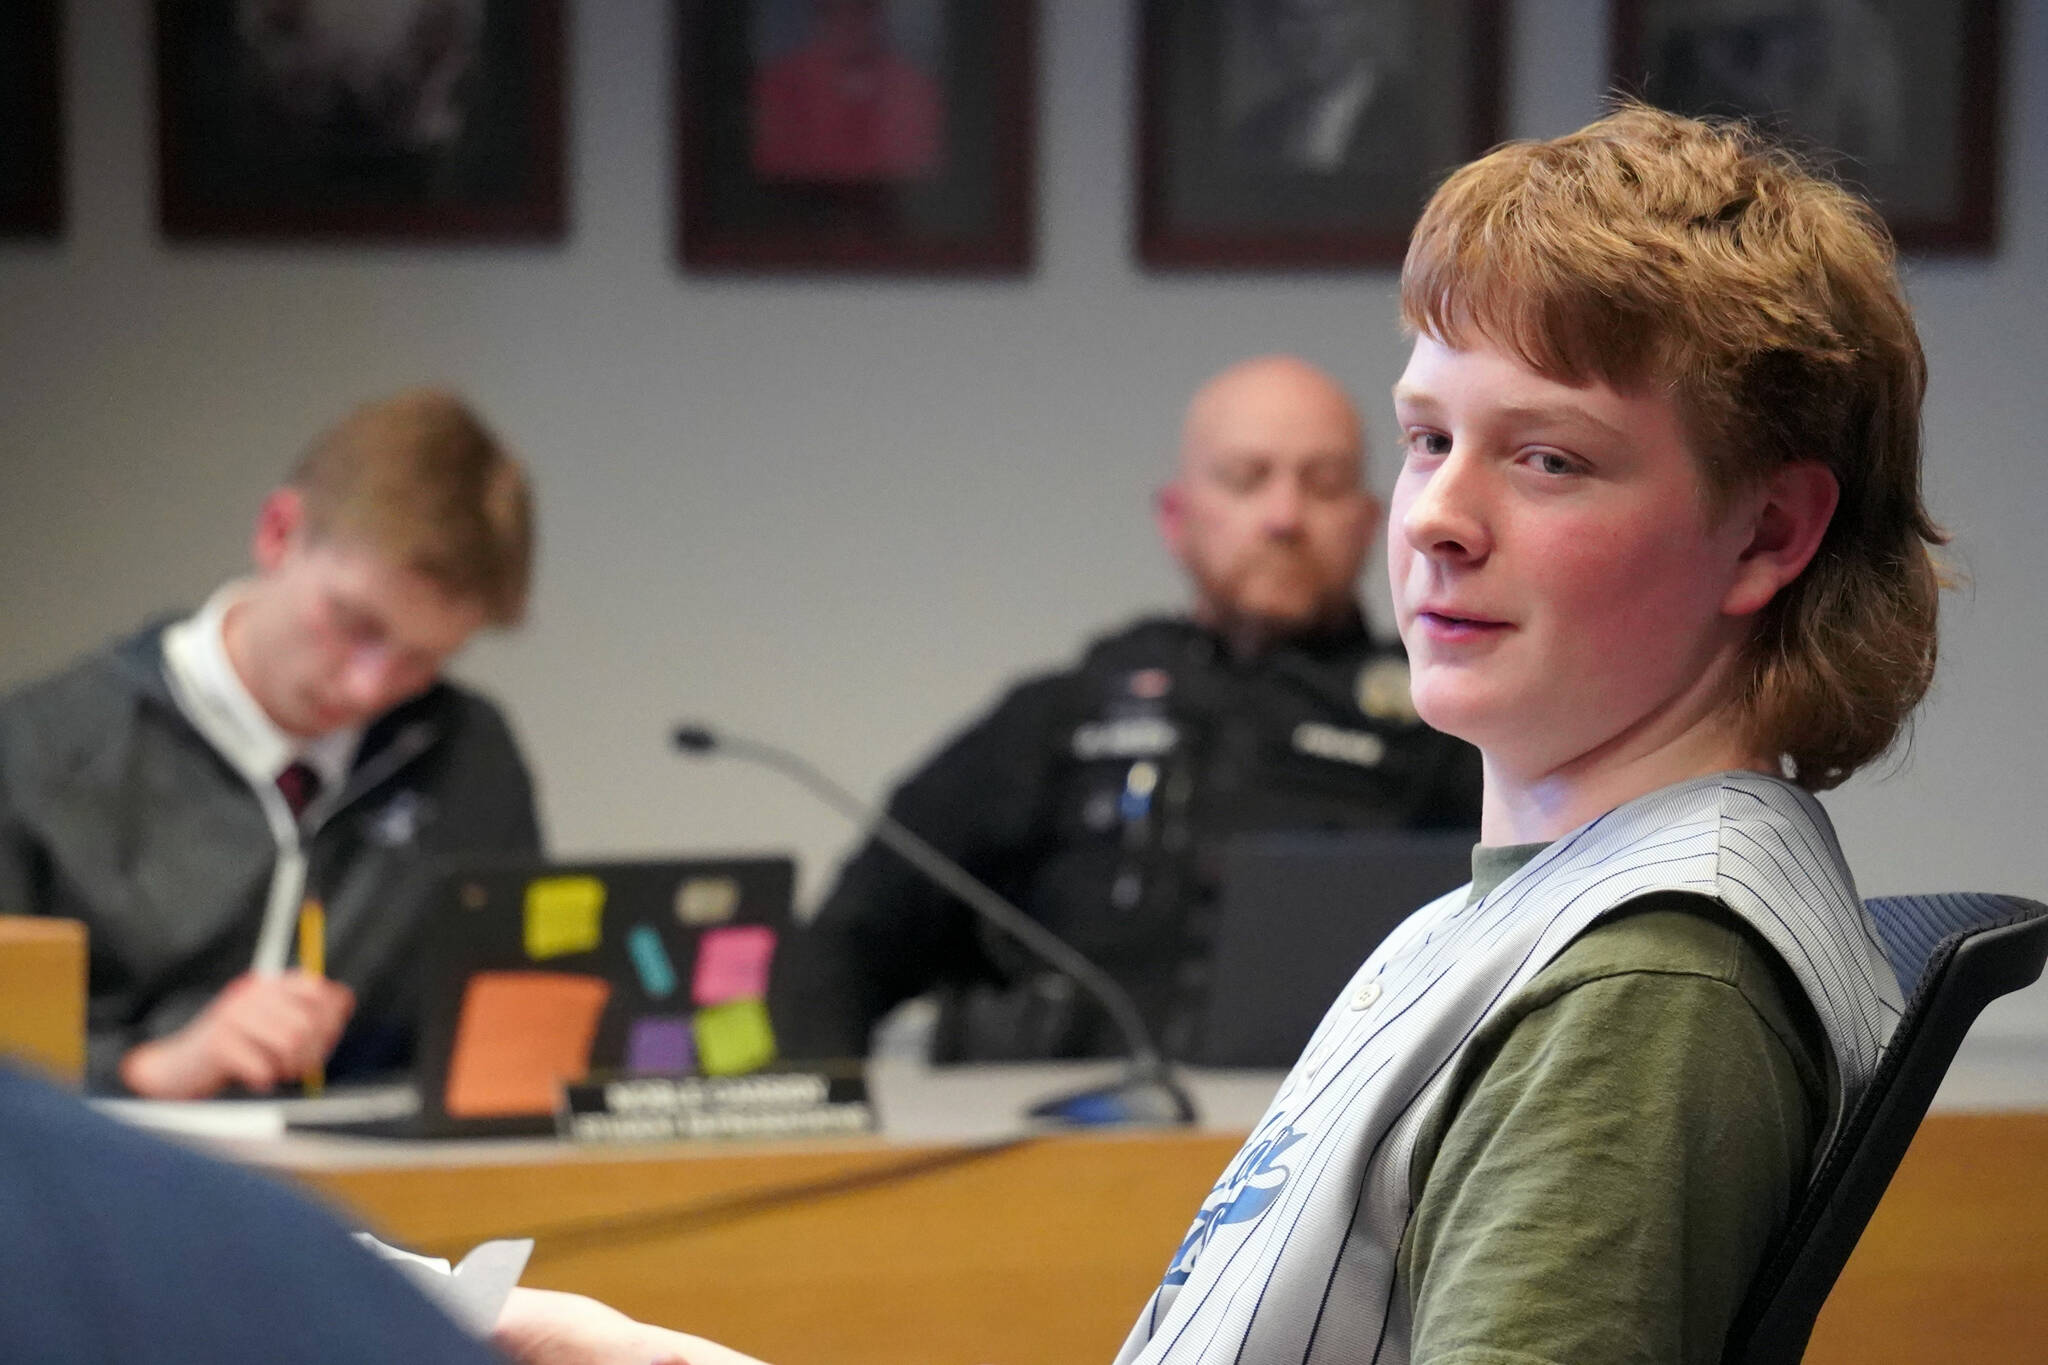 Corey Cannon, who plays baseball as part of Soldotna Little League, speaks to the Soldotna City Council during their meeting in Soldotna, Alaska, on Wednesday, April 10, 2024. (Jake Dye/Peninsula Clarion)